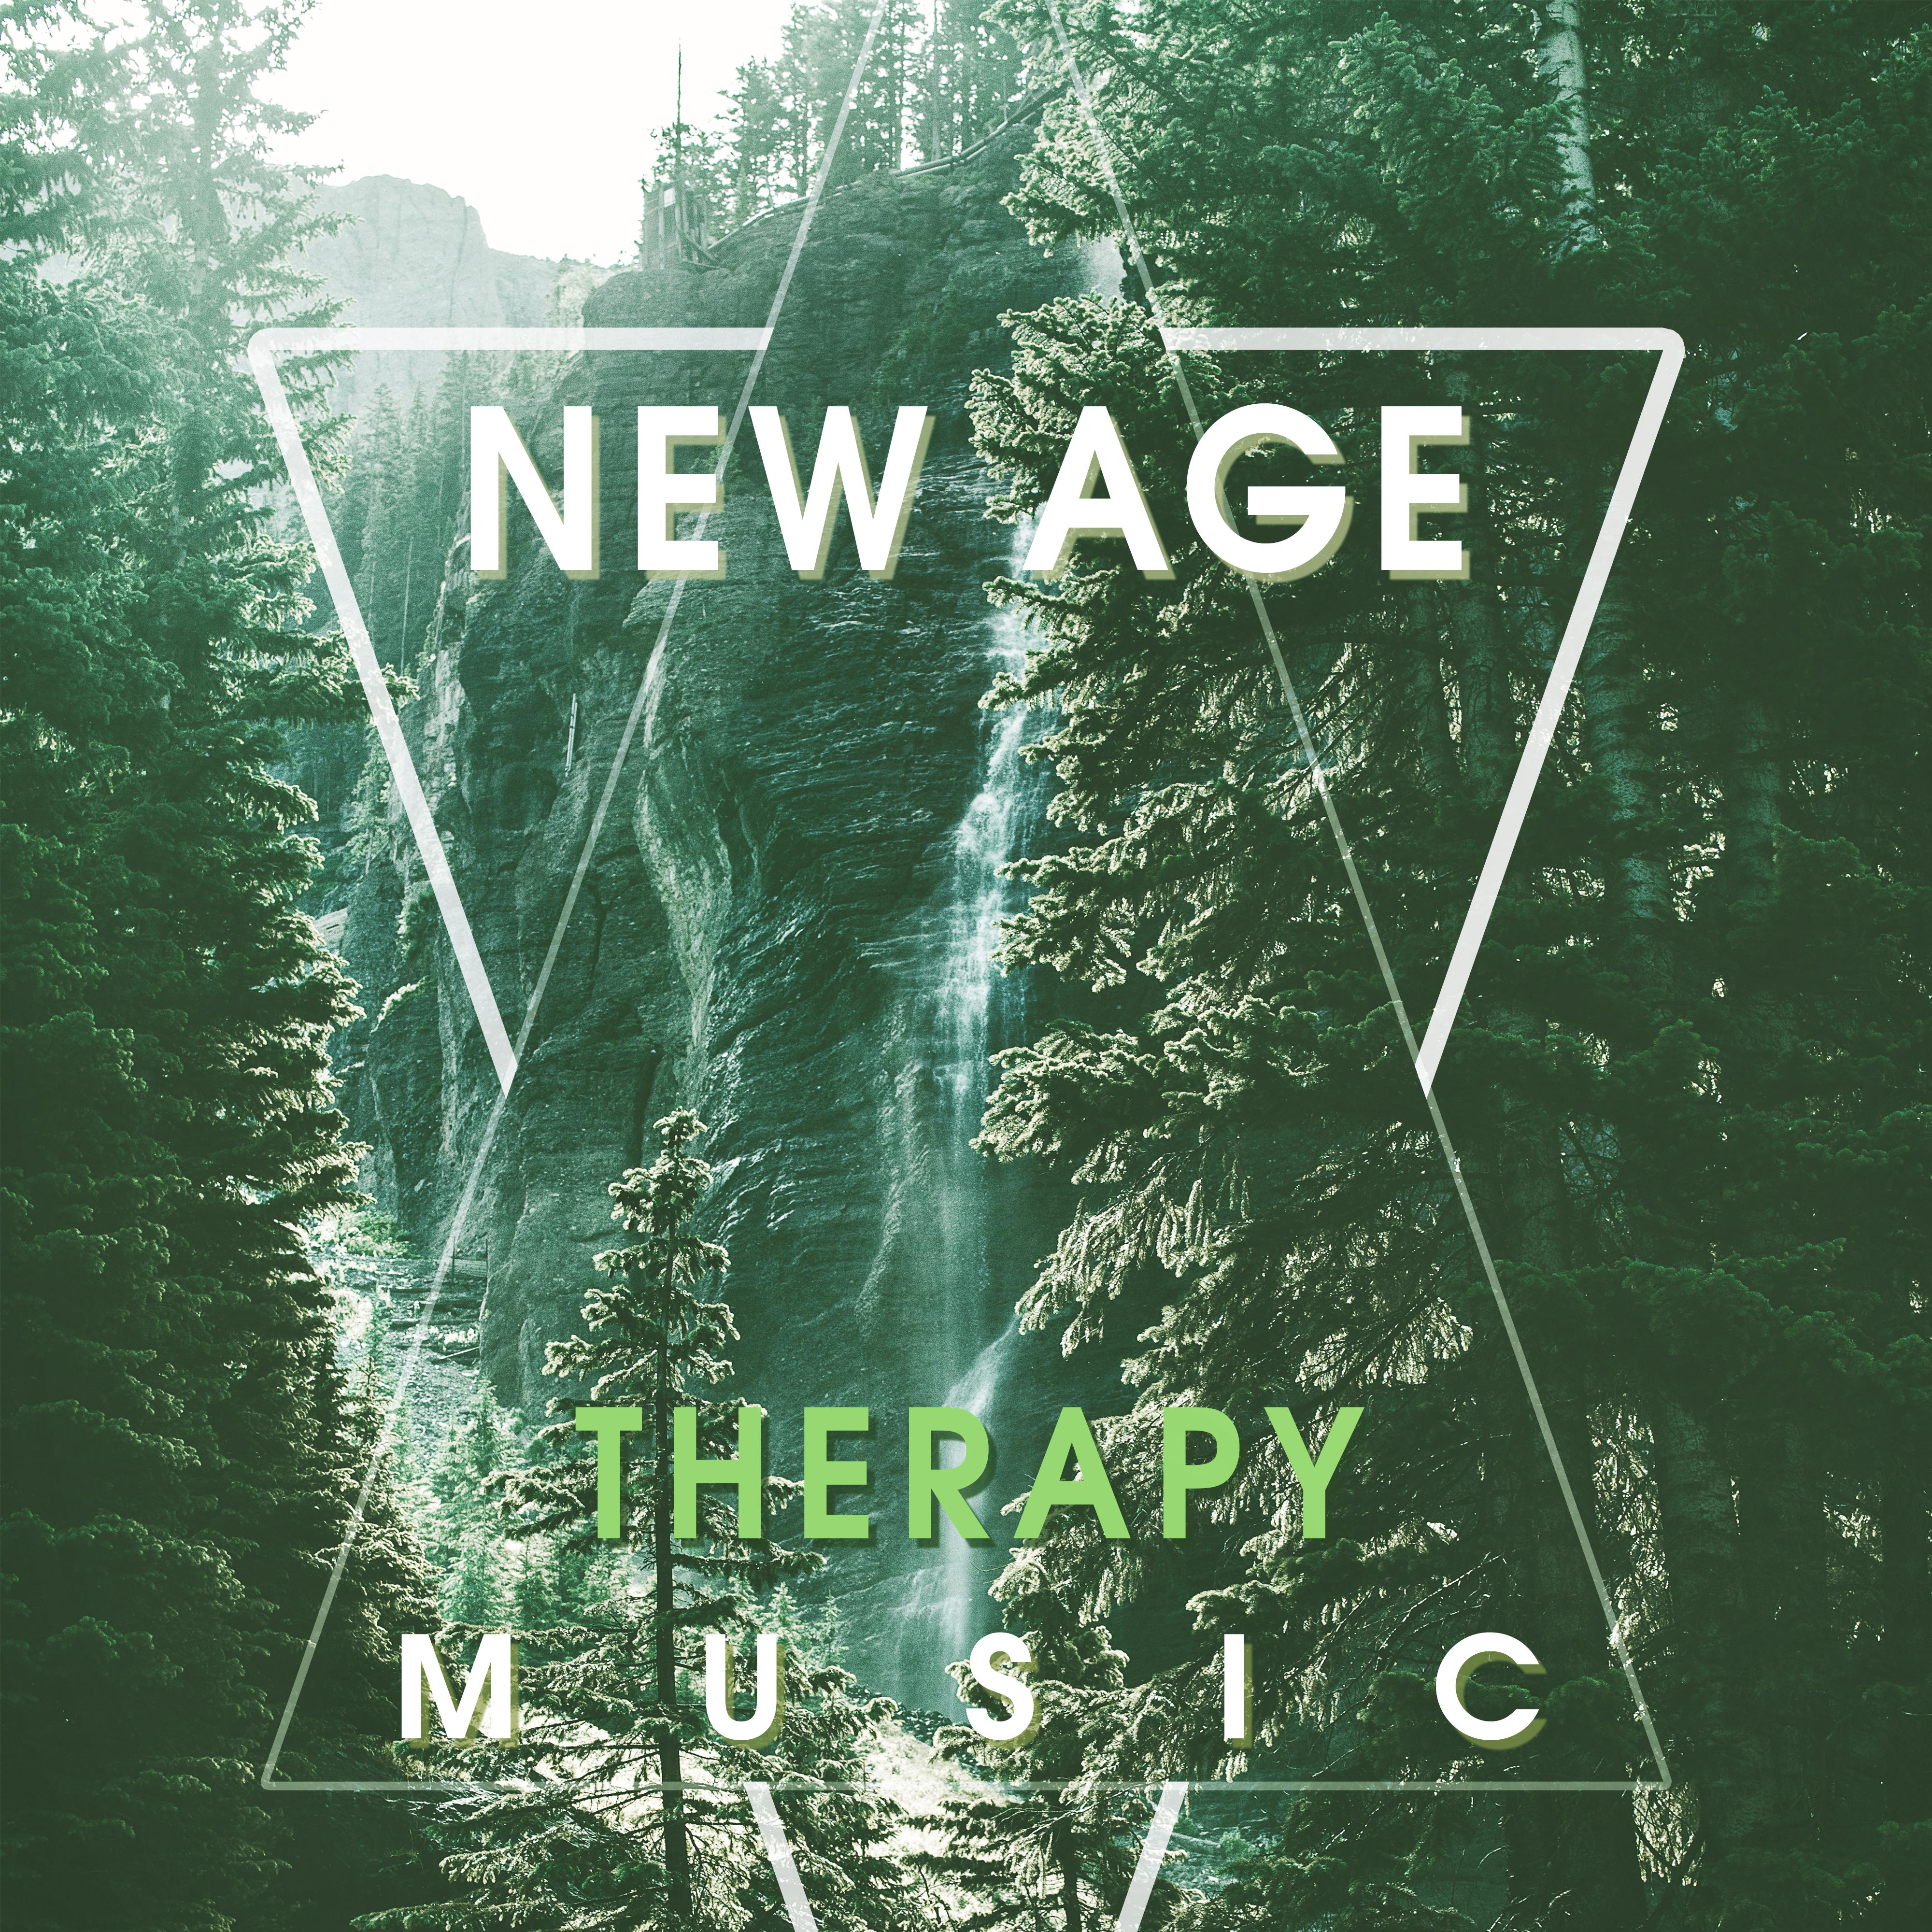 New Age Therapy Music  Relaxing Music, Calming Songs of Nature, Rest, Harmony Life